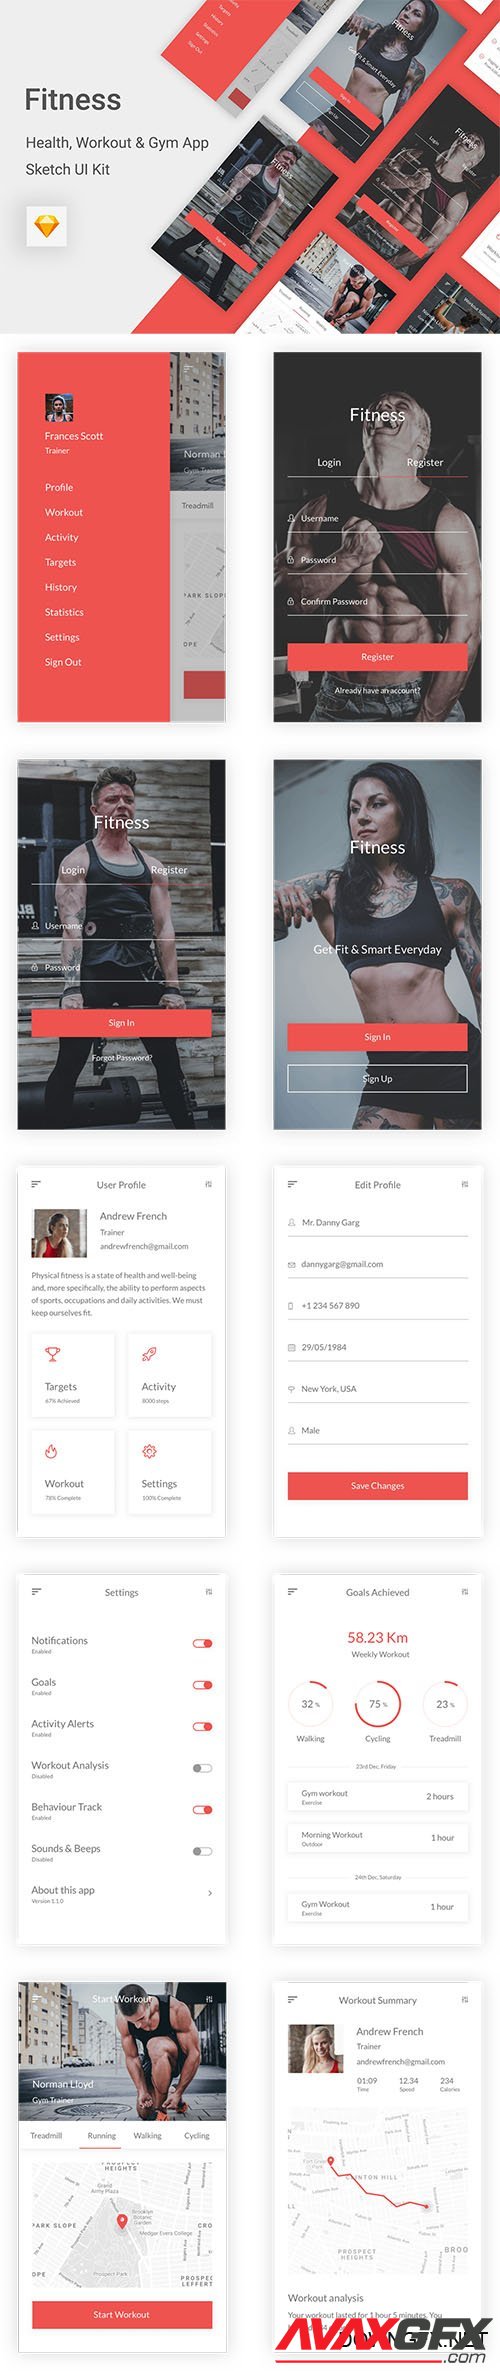 Fitness - Health, Workout & Gym UI Kit for Sketch